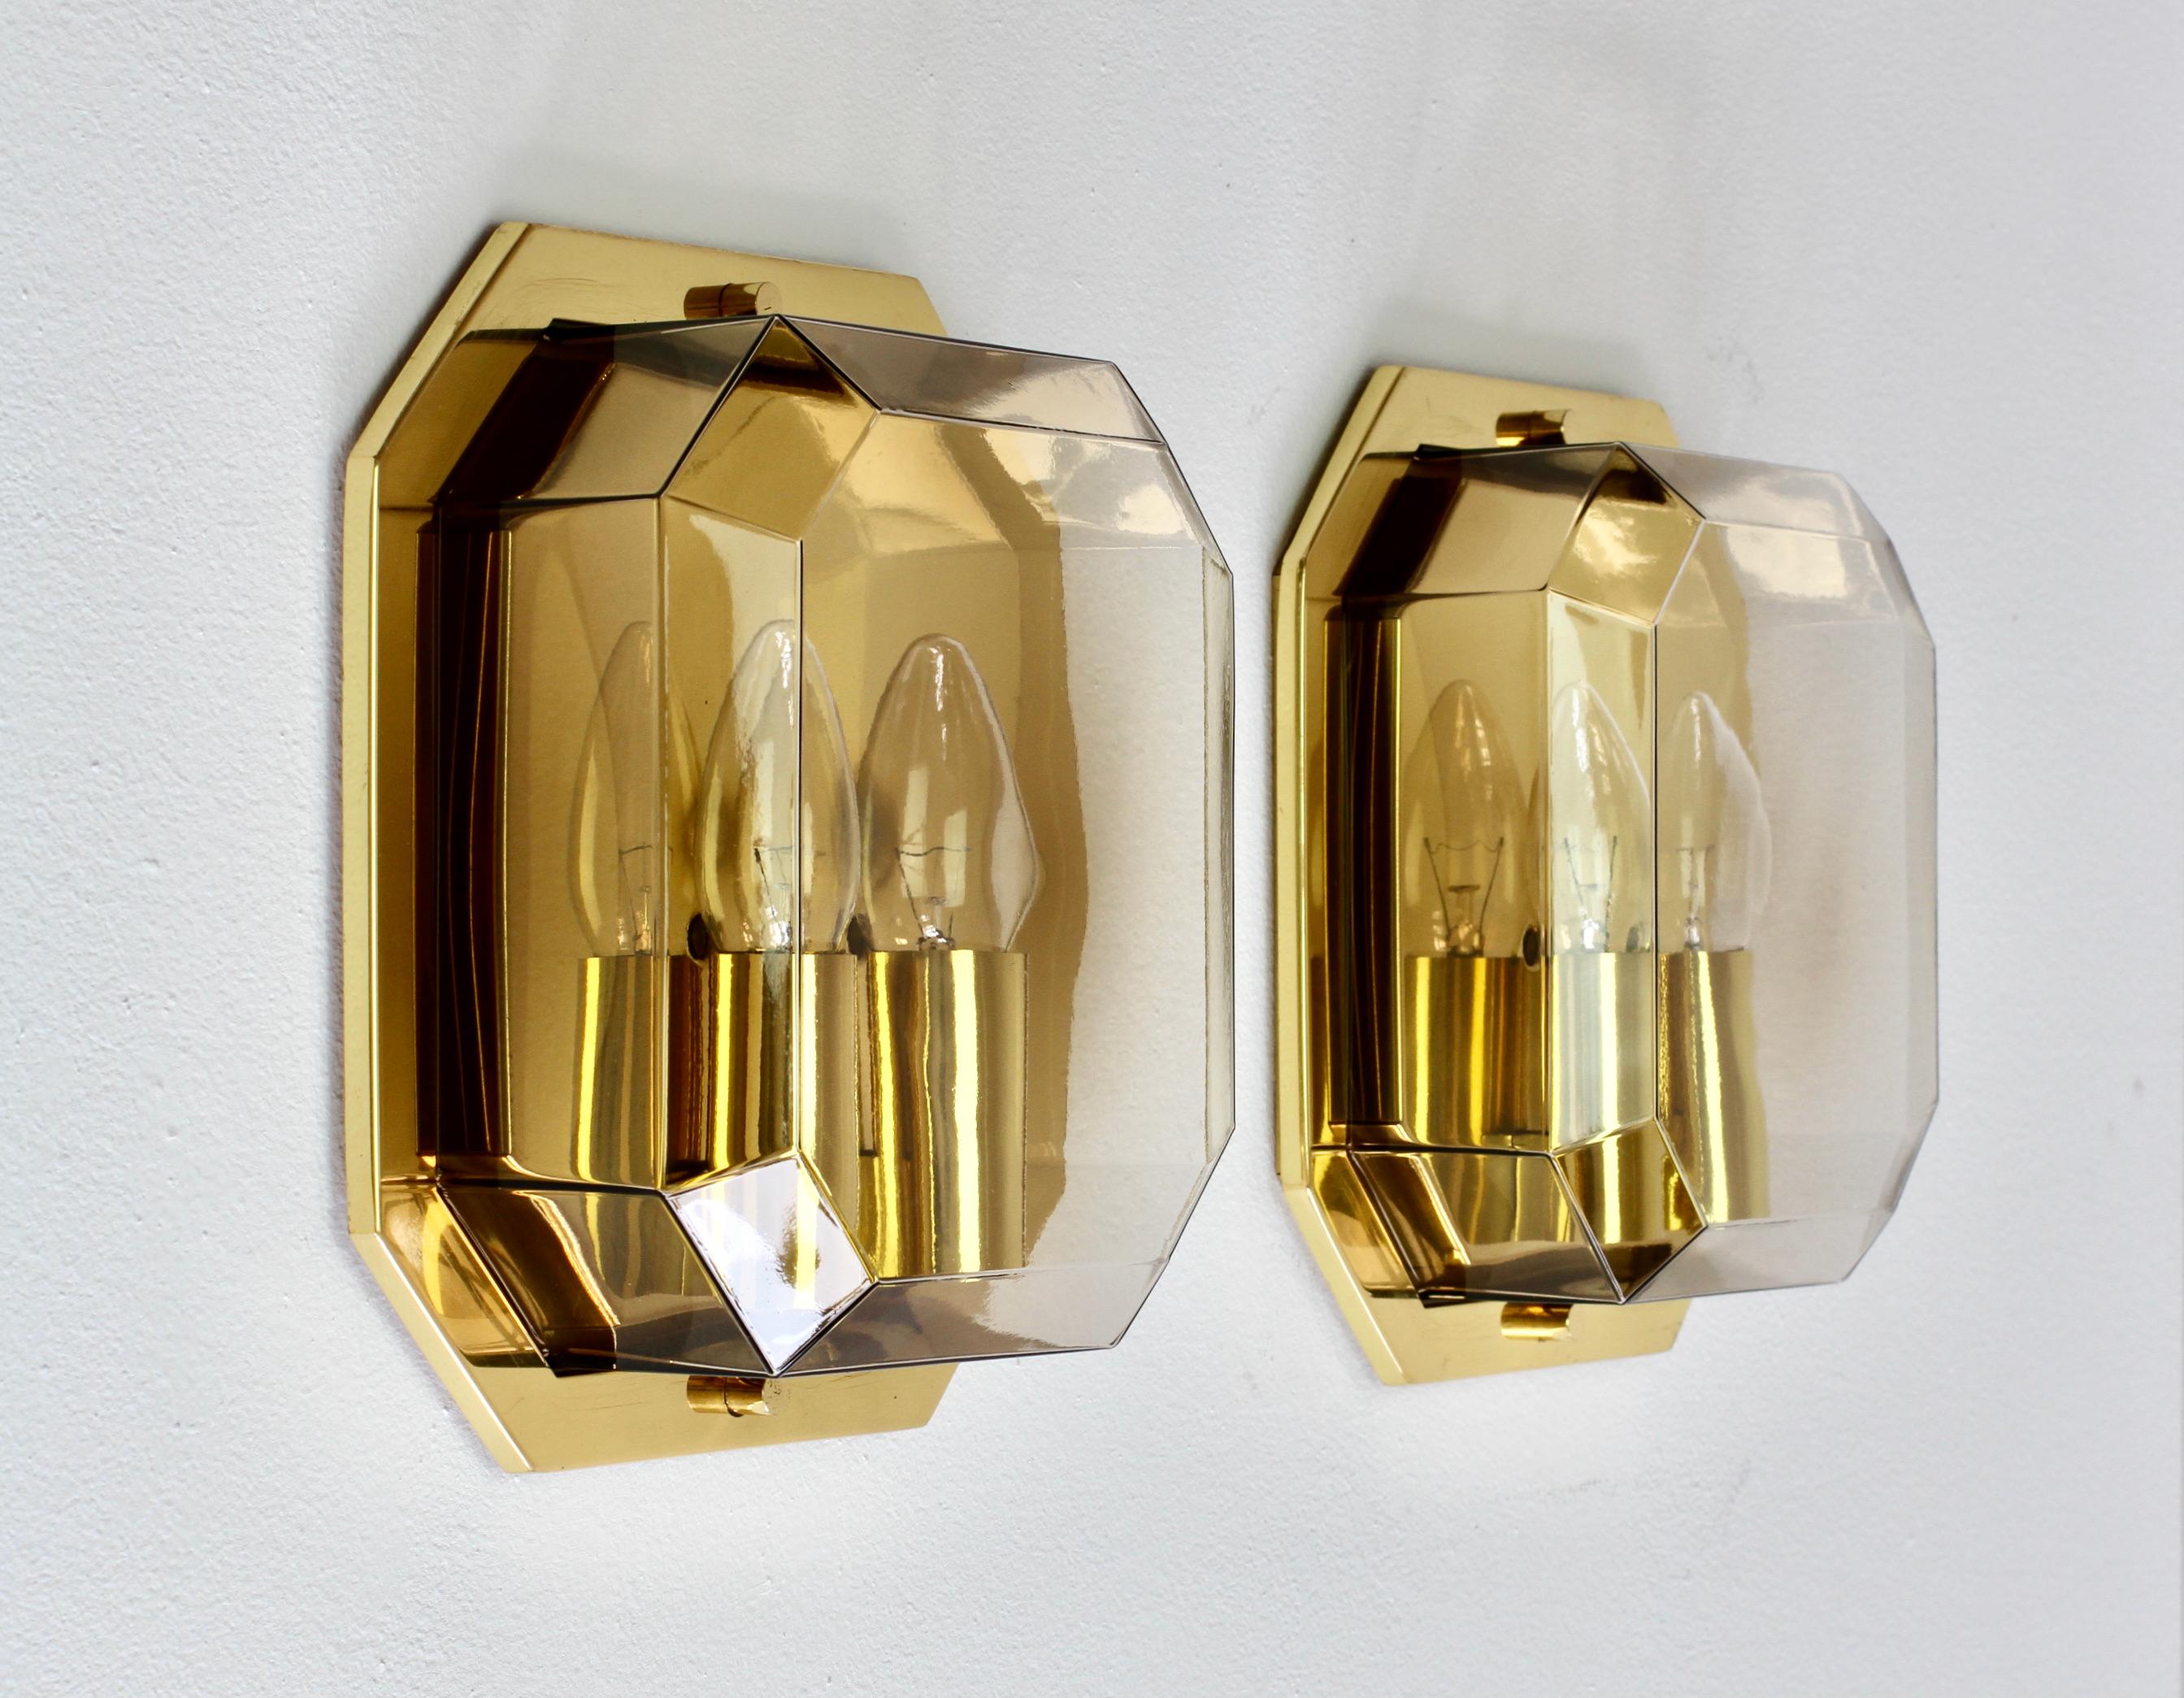 Pair of stunning and elegant vintage mid-century double socketed flush mount wall lights, lamps or sconces by iconic German lighting manufacturer Glashütte Limburg, circa 1975-1985. Featuring a geometric shaped mouth blown smoked or tinted glass